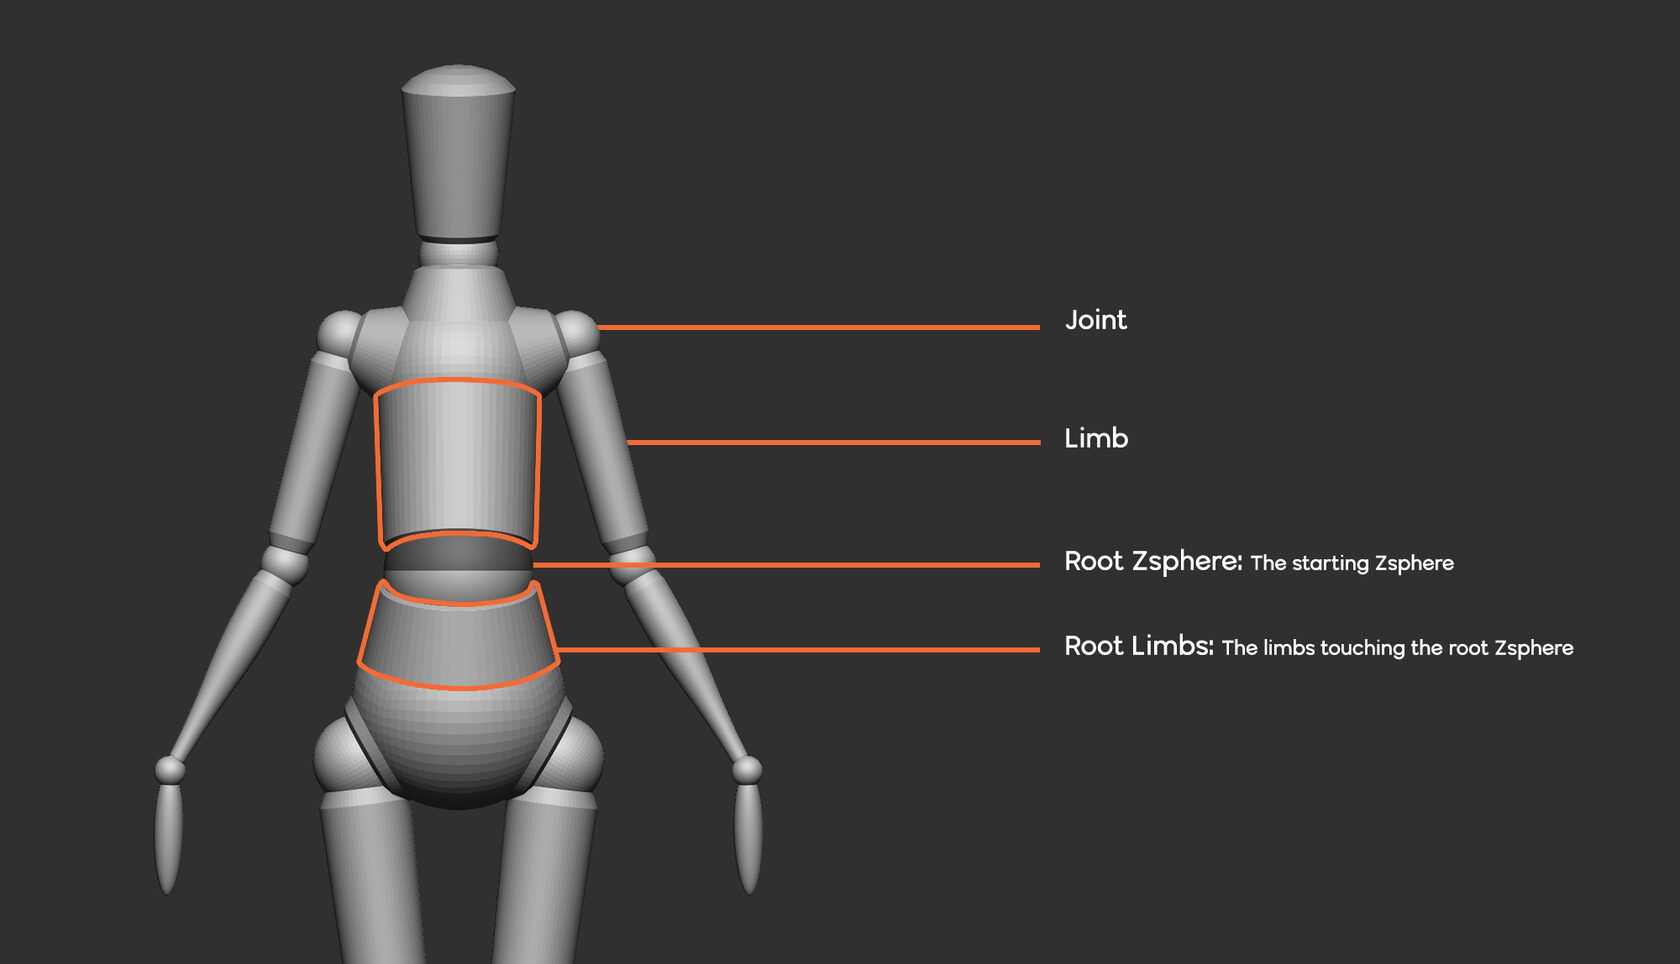 a pose mannequin zbrush